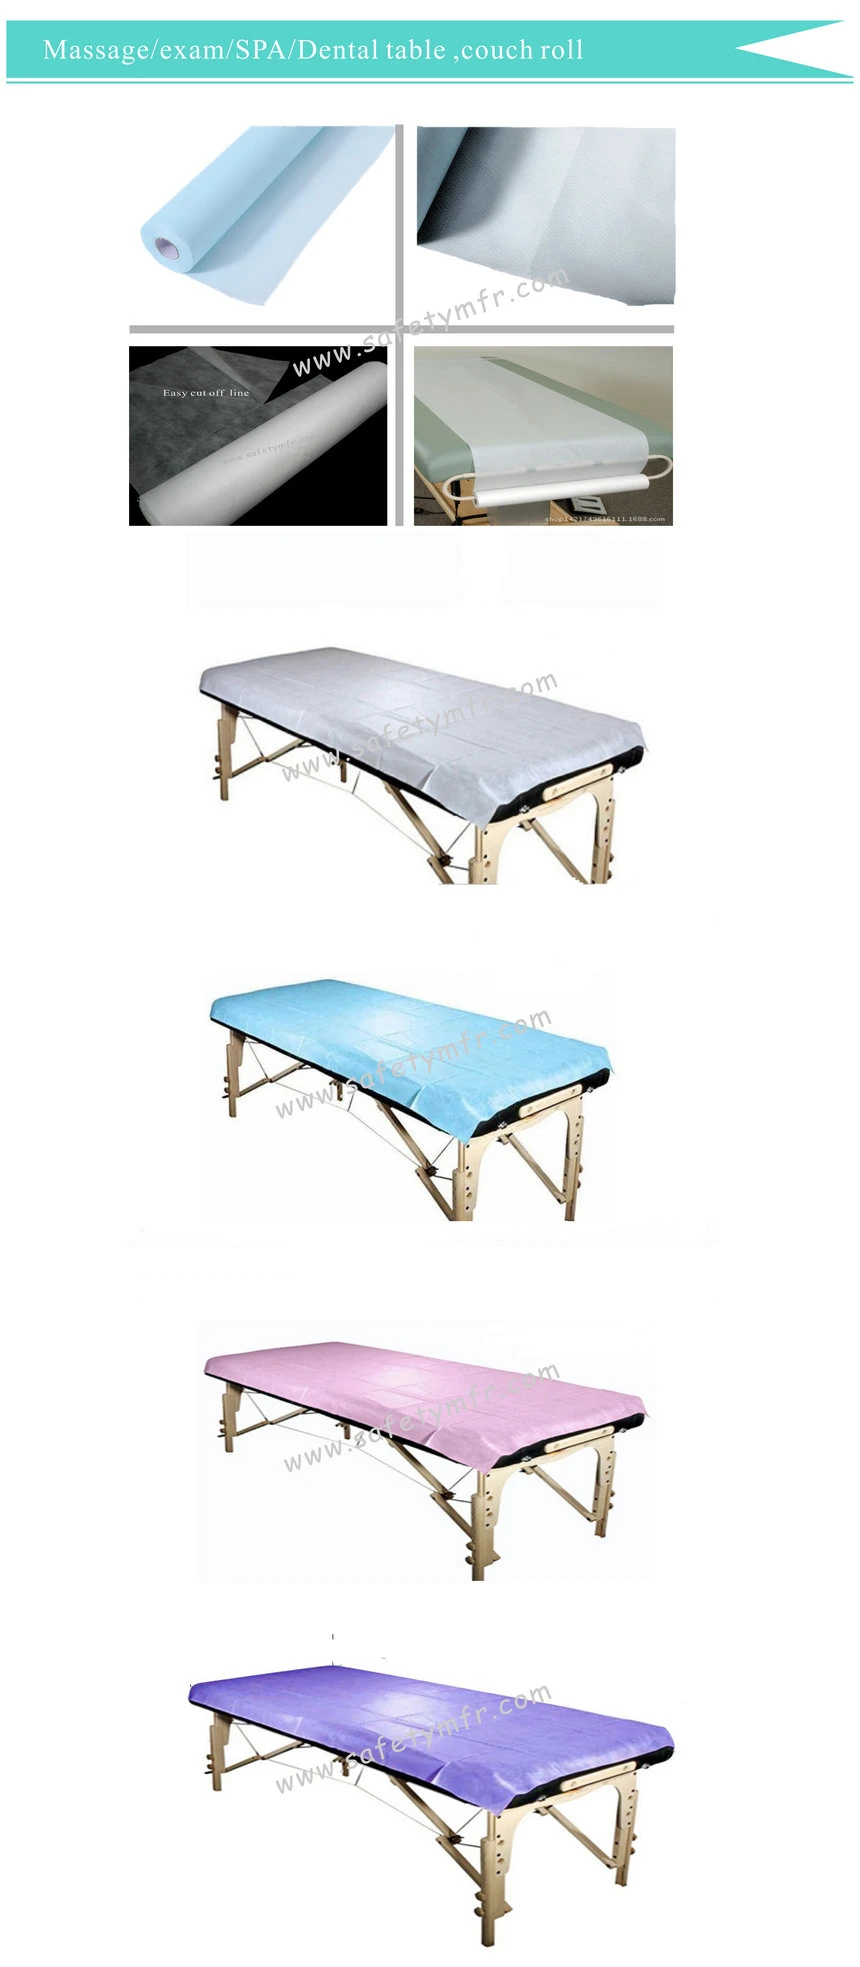 SPA/Salon/Hospital/medial/dental/clinic/Exam Table Paper Bedsheet Roll, Perforated Nonwoven Disposable bedsheet Roll